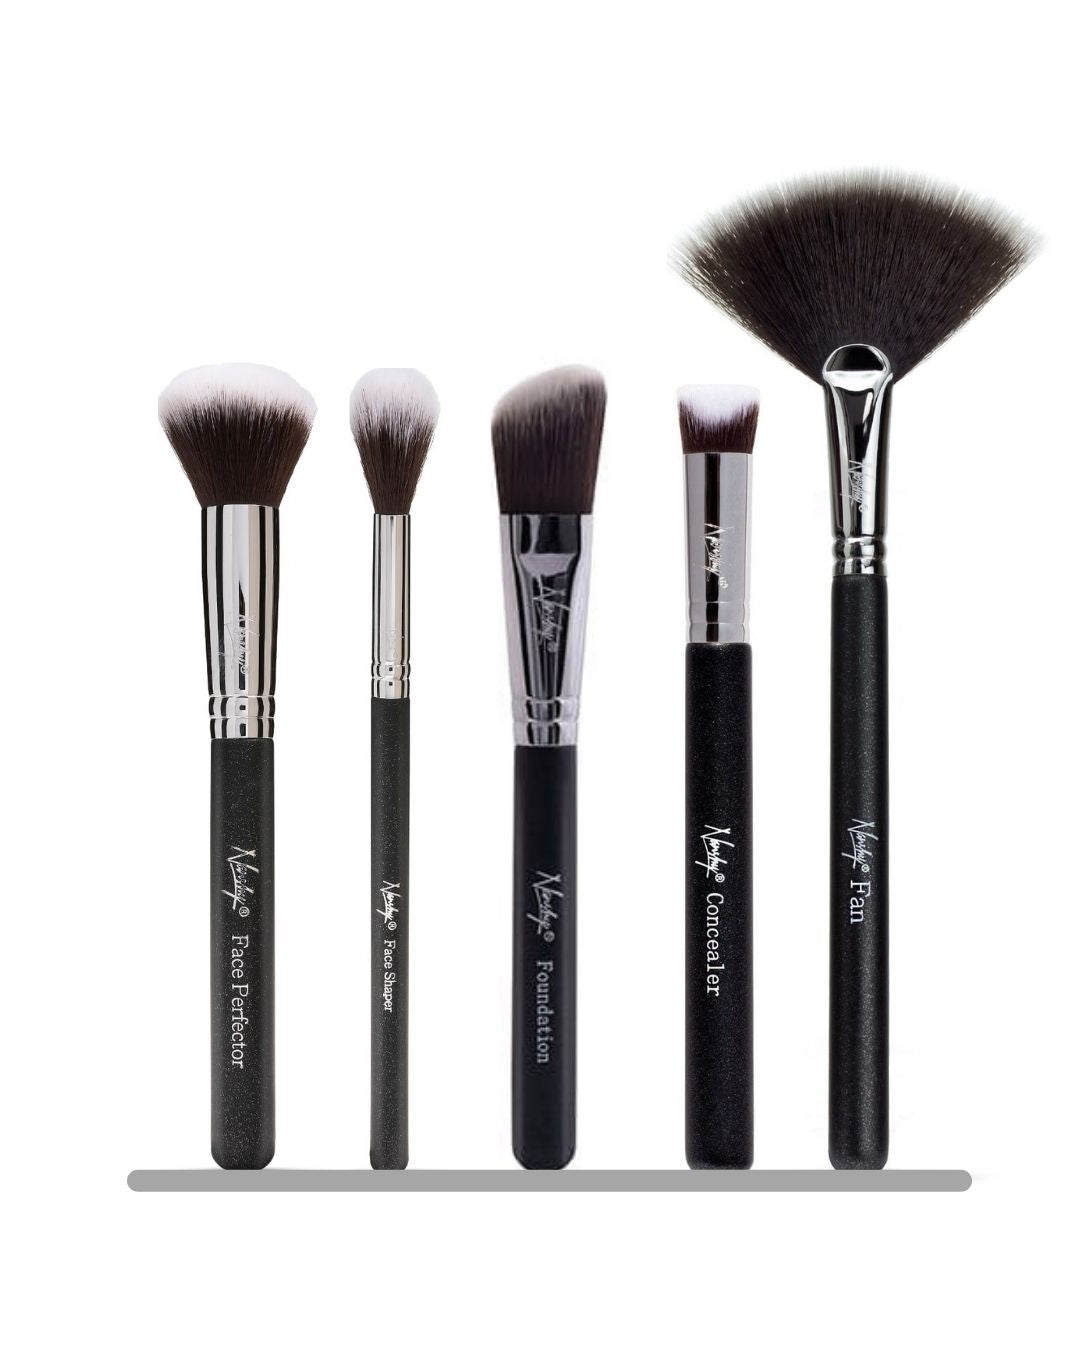 28 Ultimate Face and Eyes Makeup Brush Set With Pouch